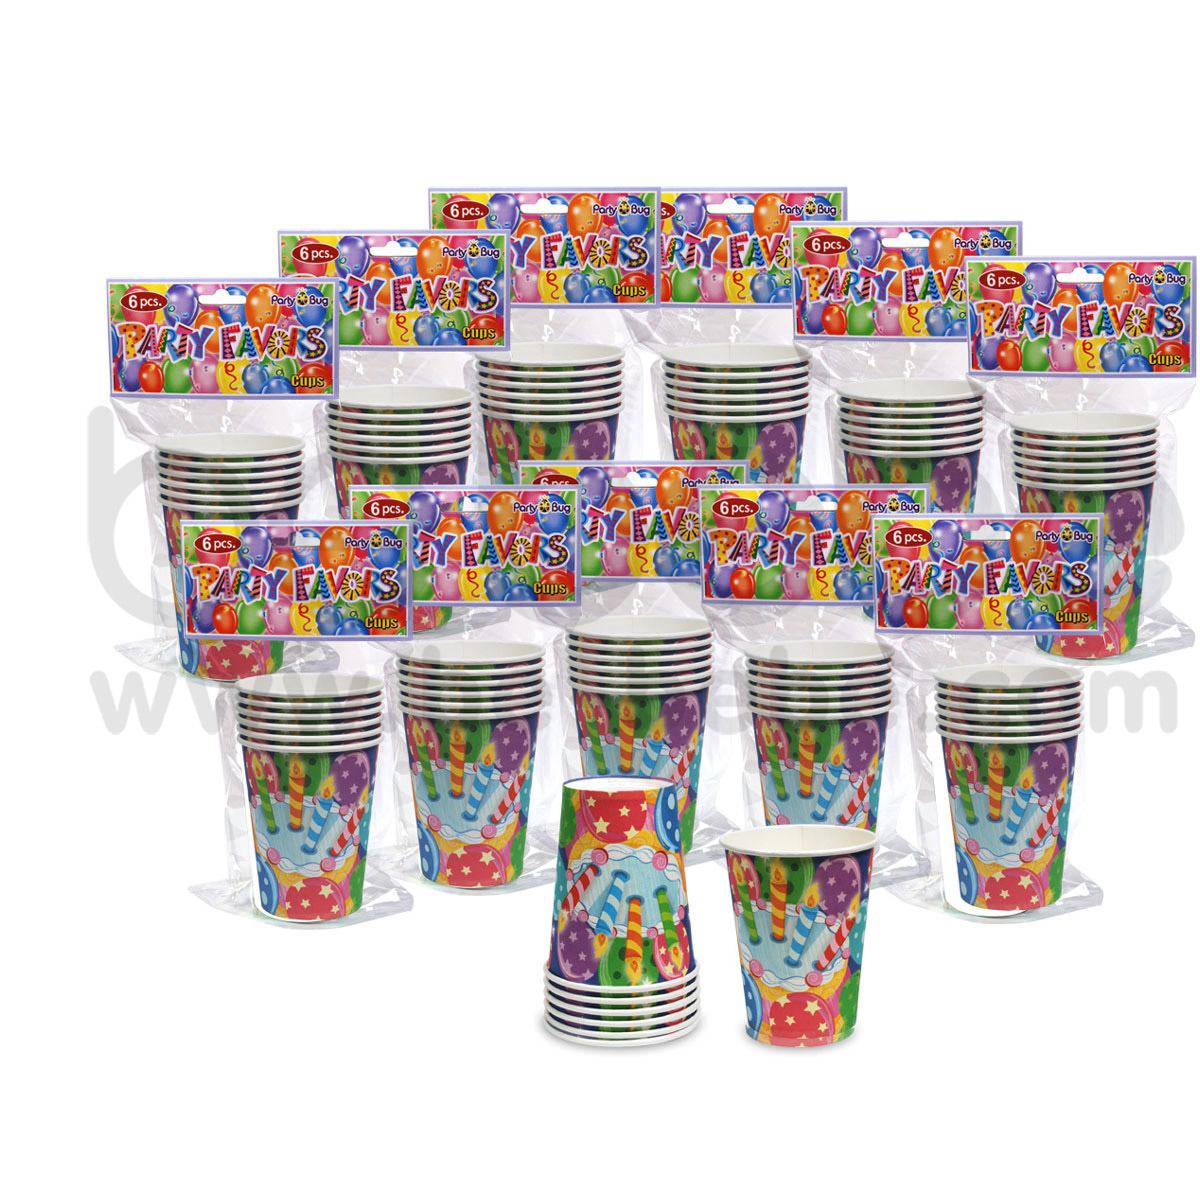 PARTY BUG : Paper cup 9 Oz., 12 Packs